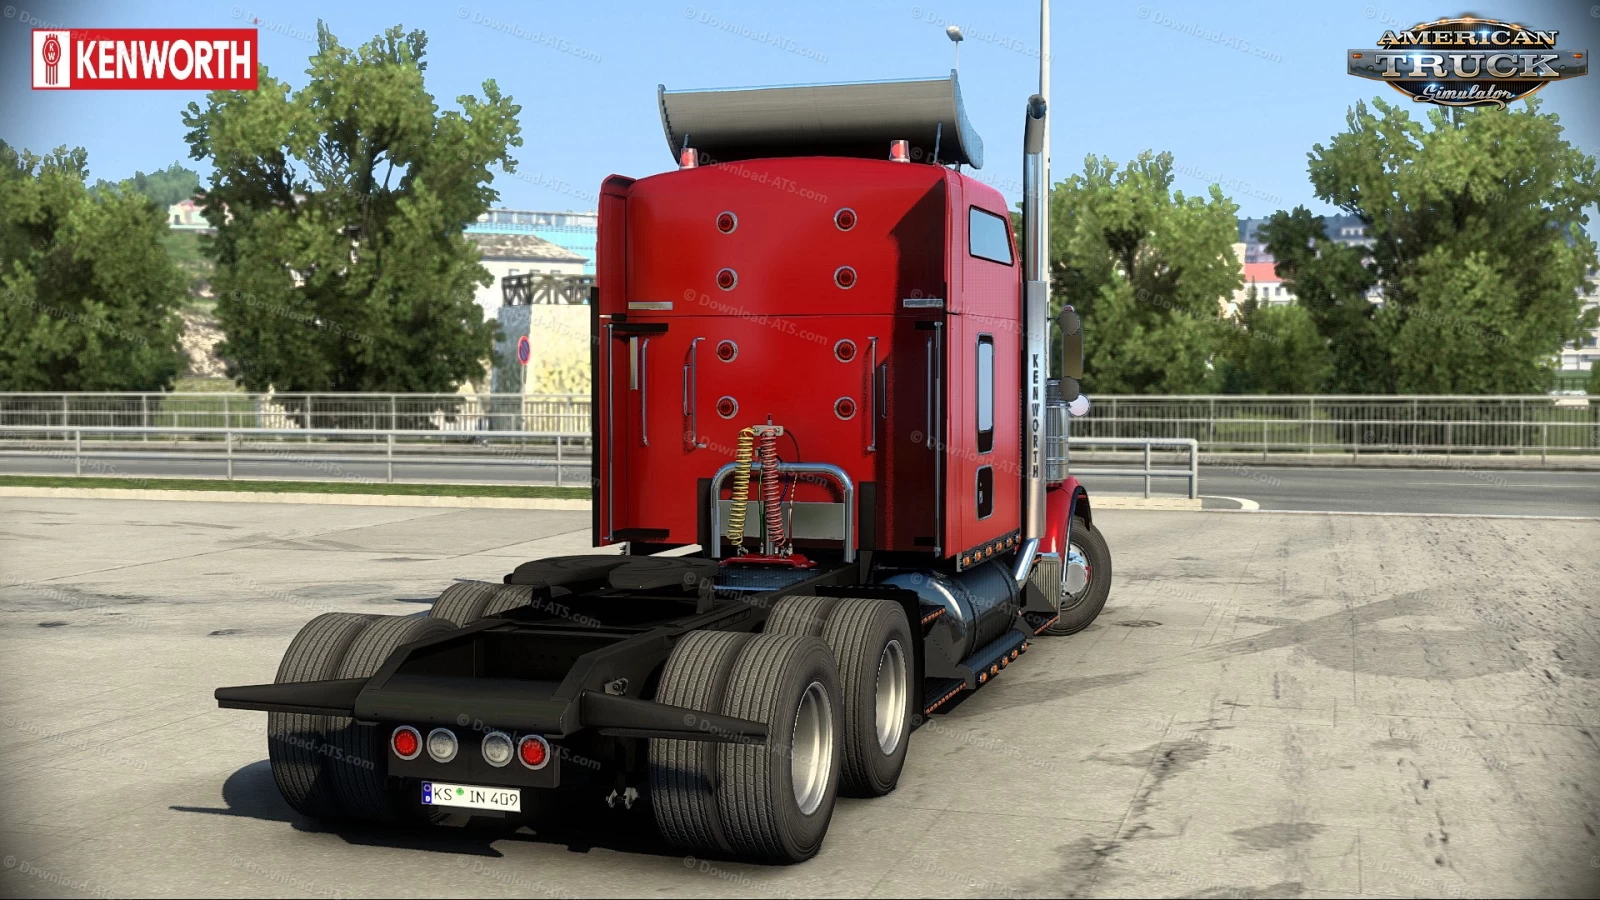 Kenworth T800 v1.4 Edit by Cartruck (1.44.x) for ATS